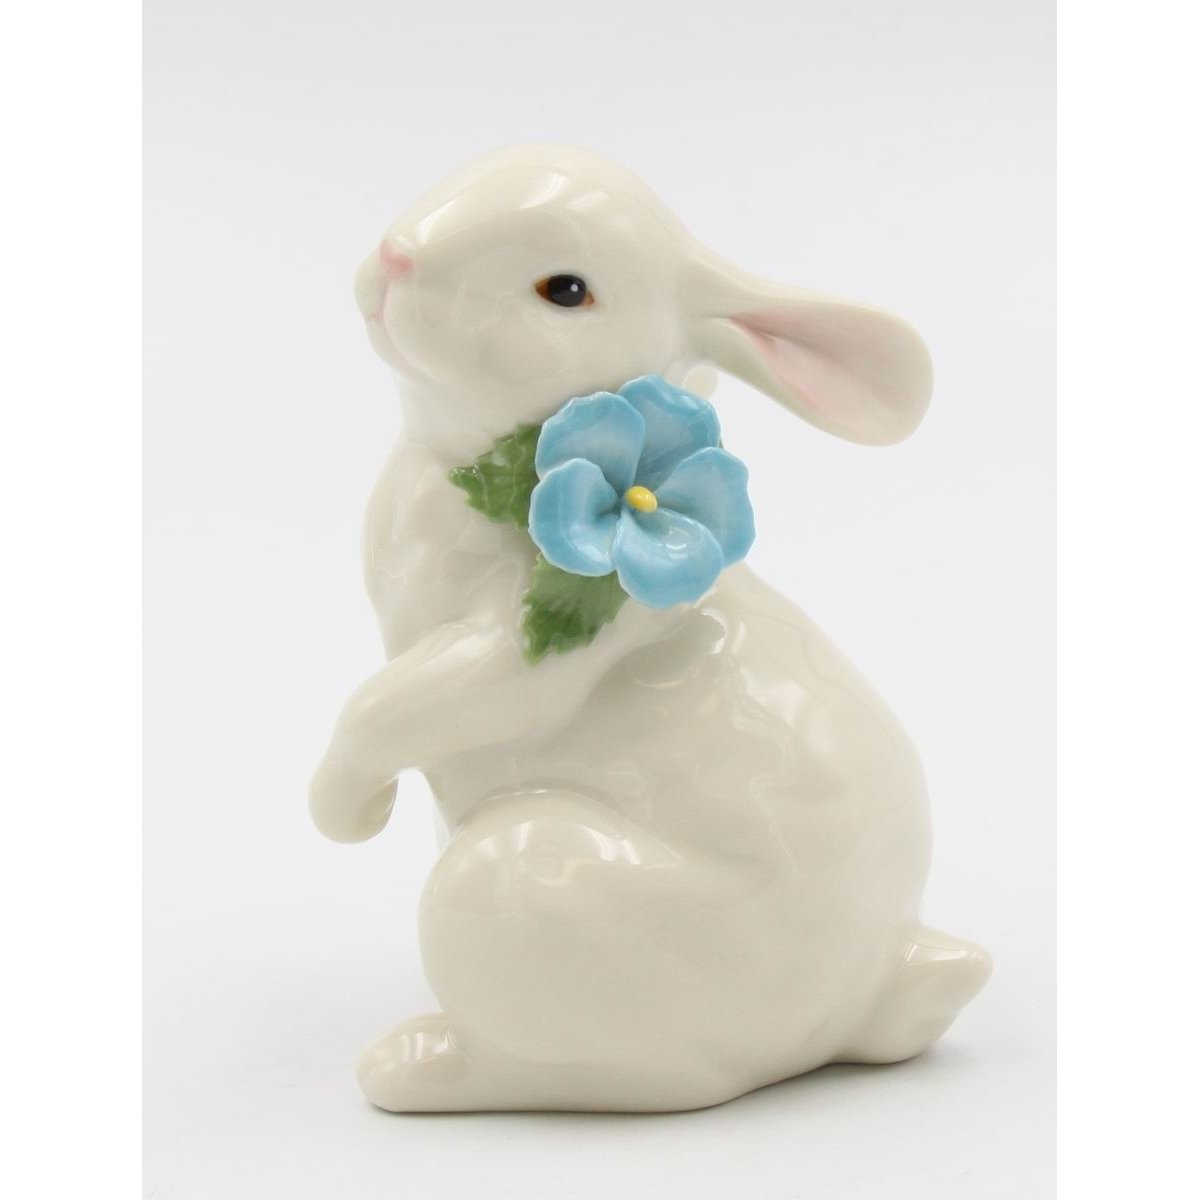 kevinsgiftshoppe Ceramic White Rabbit with Blue Pansy Flower Figurine, Home Décor, Gift for Her, Gift for Mom, Kitchen Décor, Spring Décor,